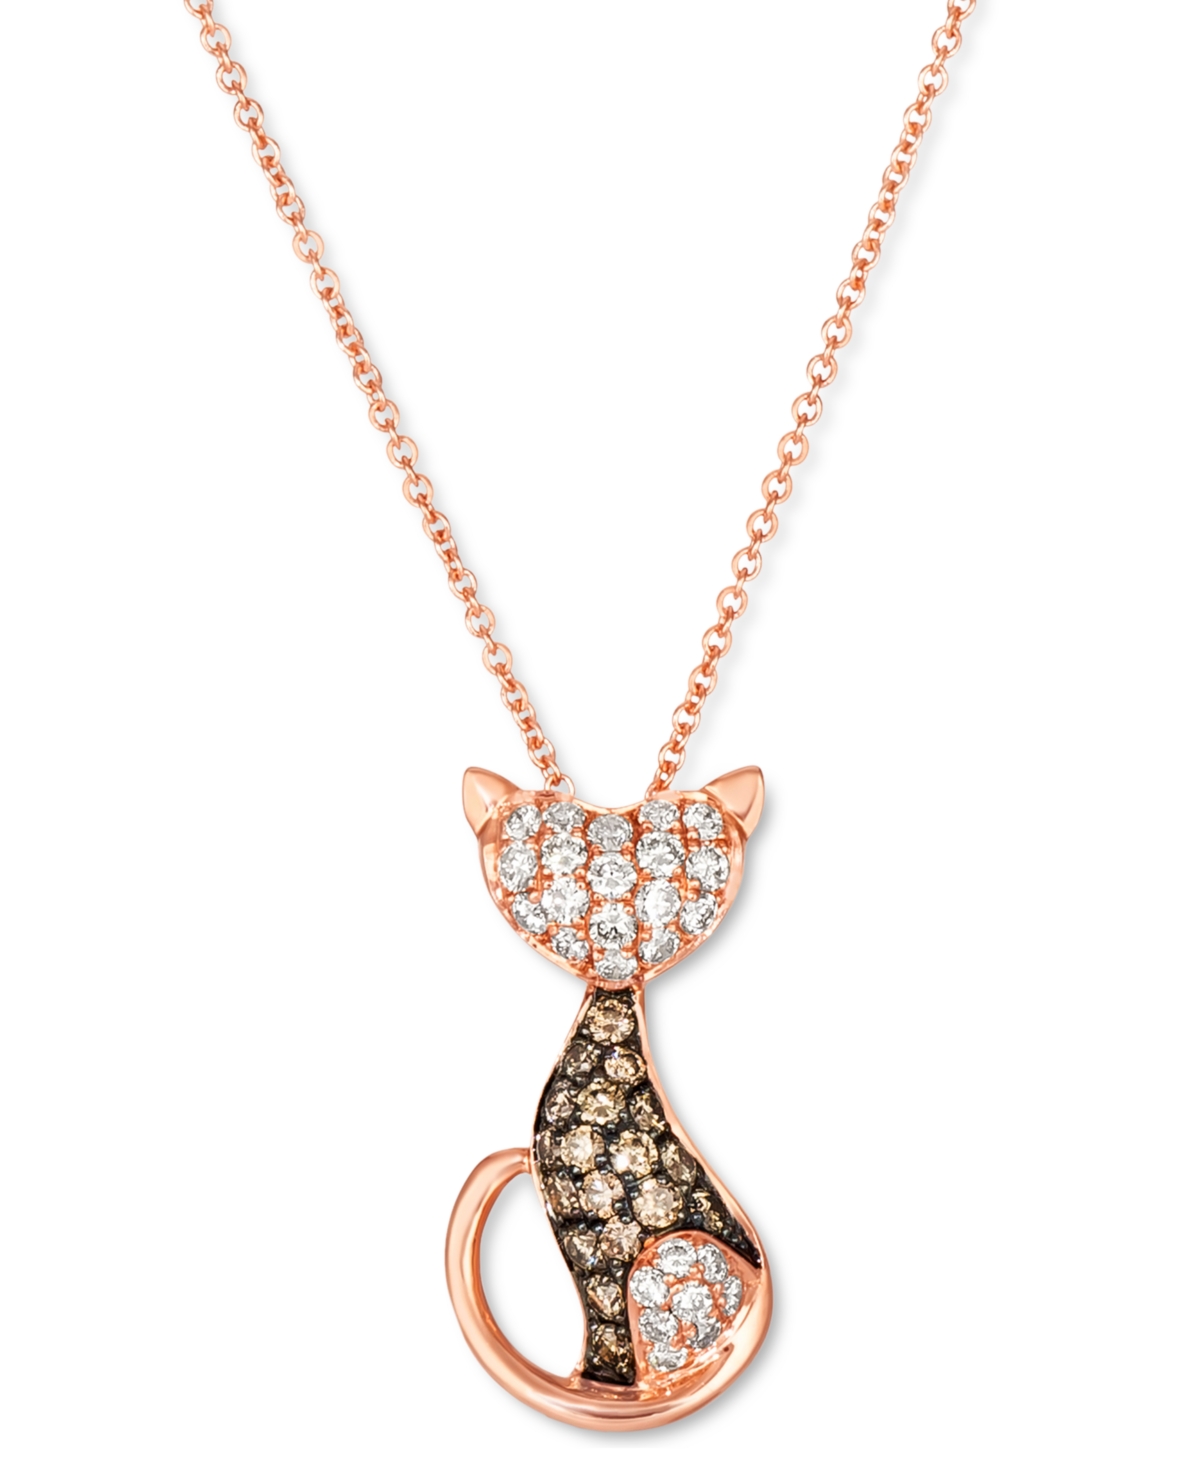 Nude Diamond (1/3 ct. t.w.) & Chocolate Diamond (1/4 ct. t.w.) Cat Necklace in 14k Rose Gold, 18" + 2" extender - Rose Gold